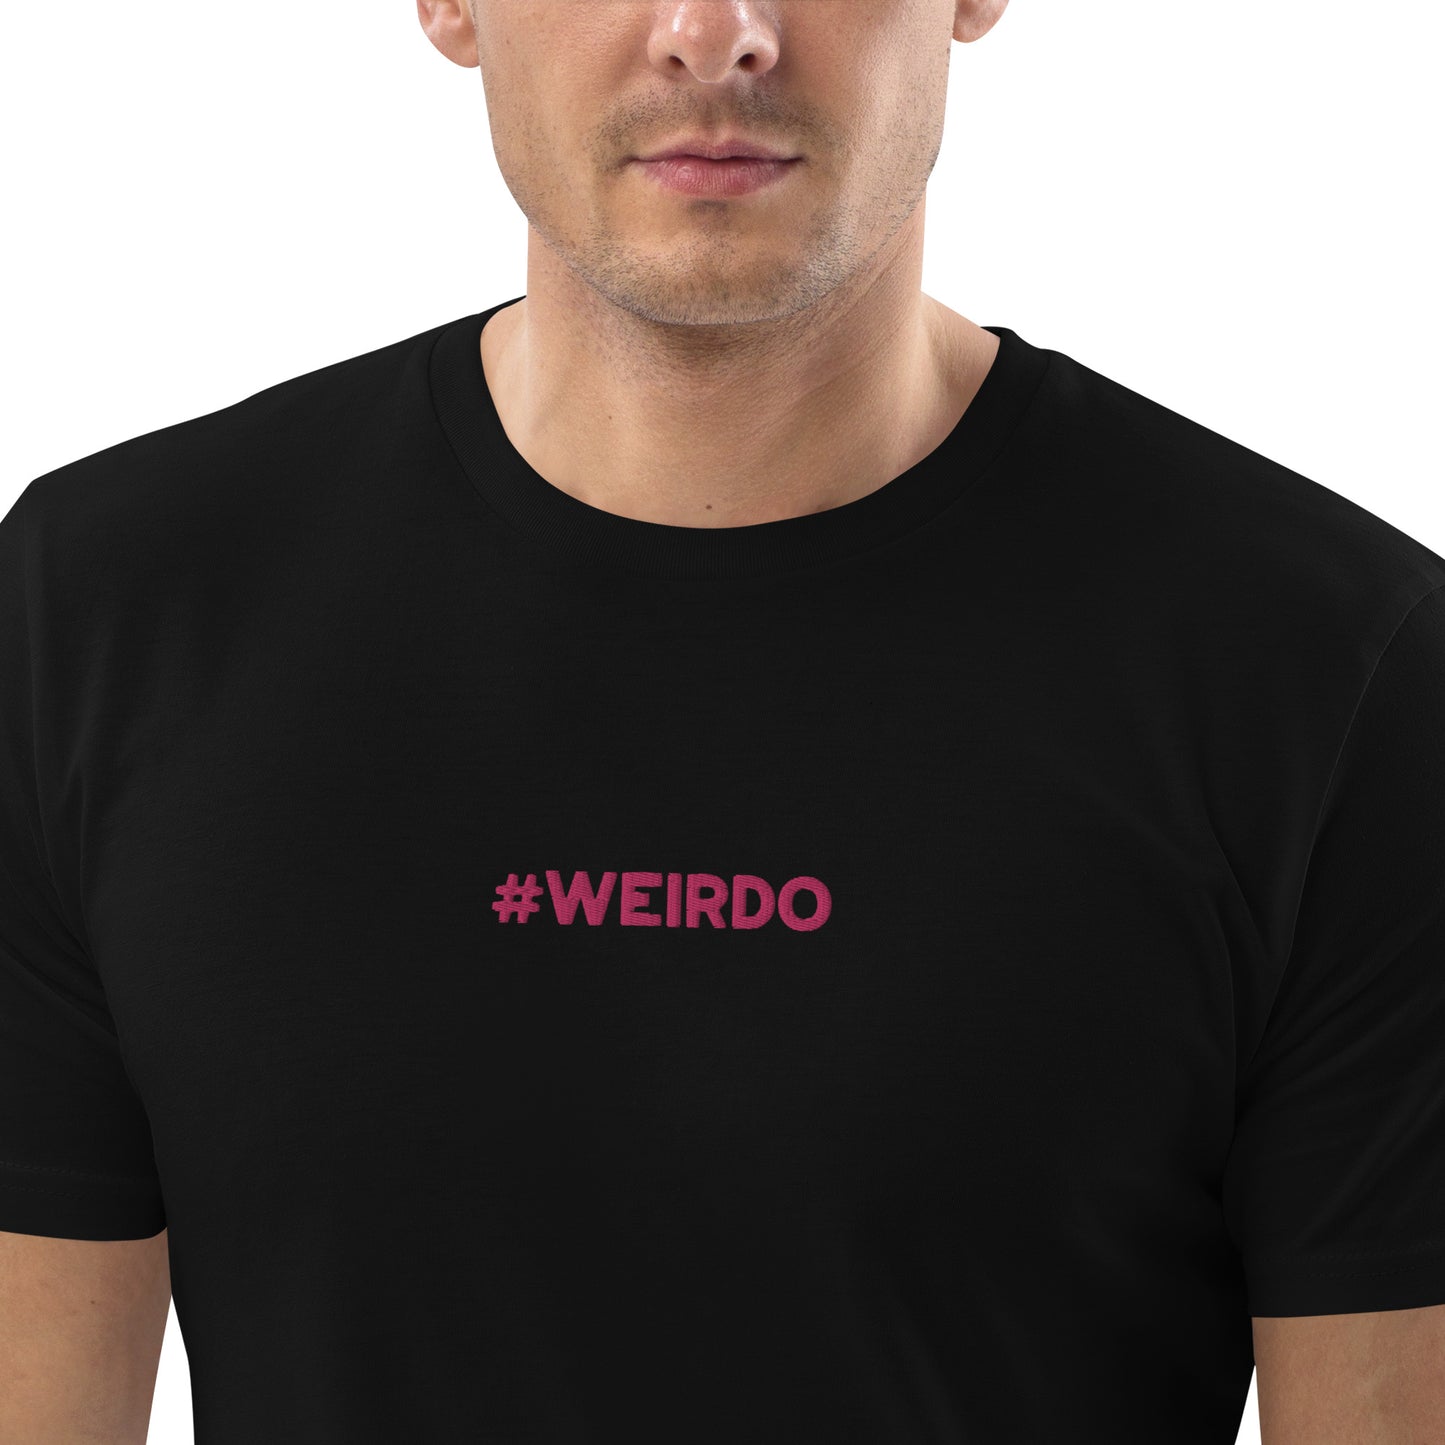 #WEIRDO meme is embroidered in pink at the front of this black cotton organic t shirt for men. If you look for a weird t shirt, this is your number one to go to webshop!